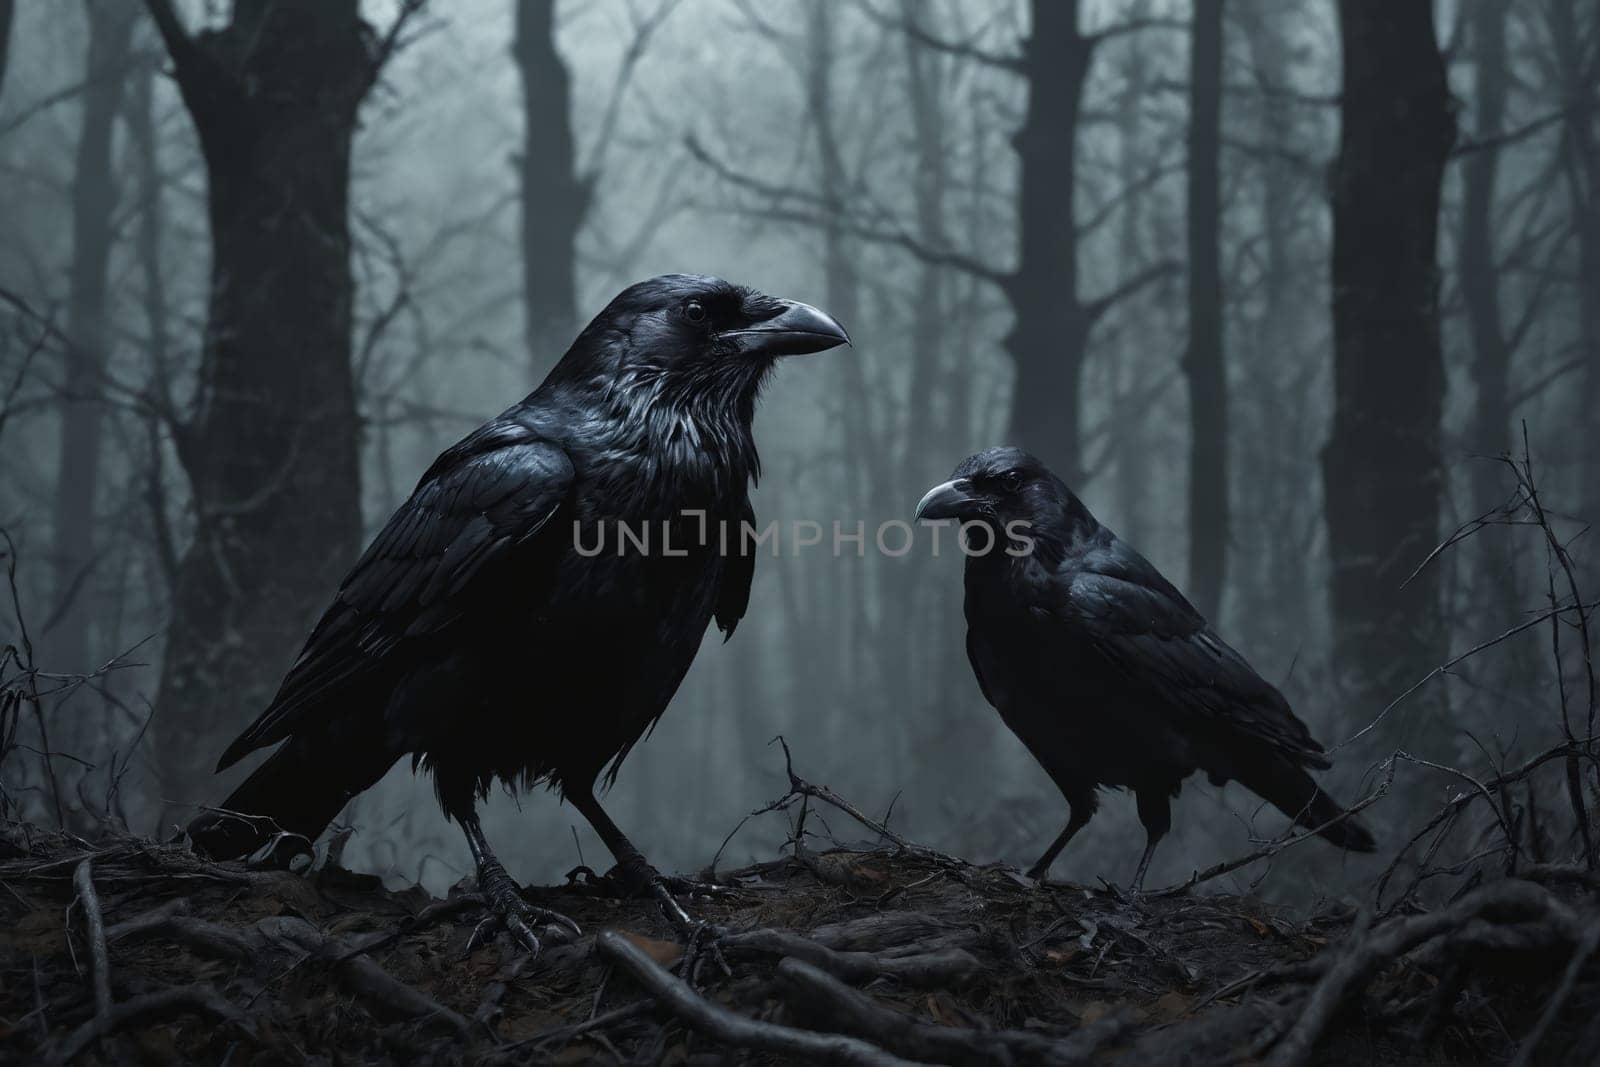 The Haunting Spectacle of Raven's Stance in an Ethereal Wild by Andre1ns